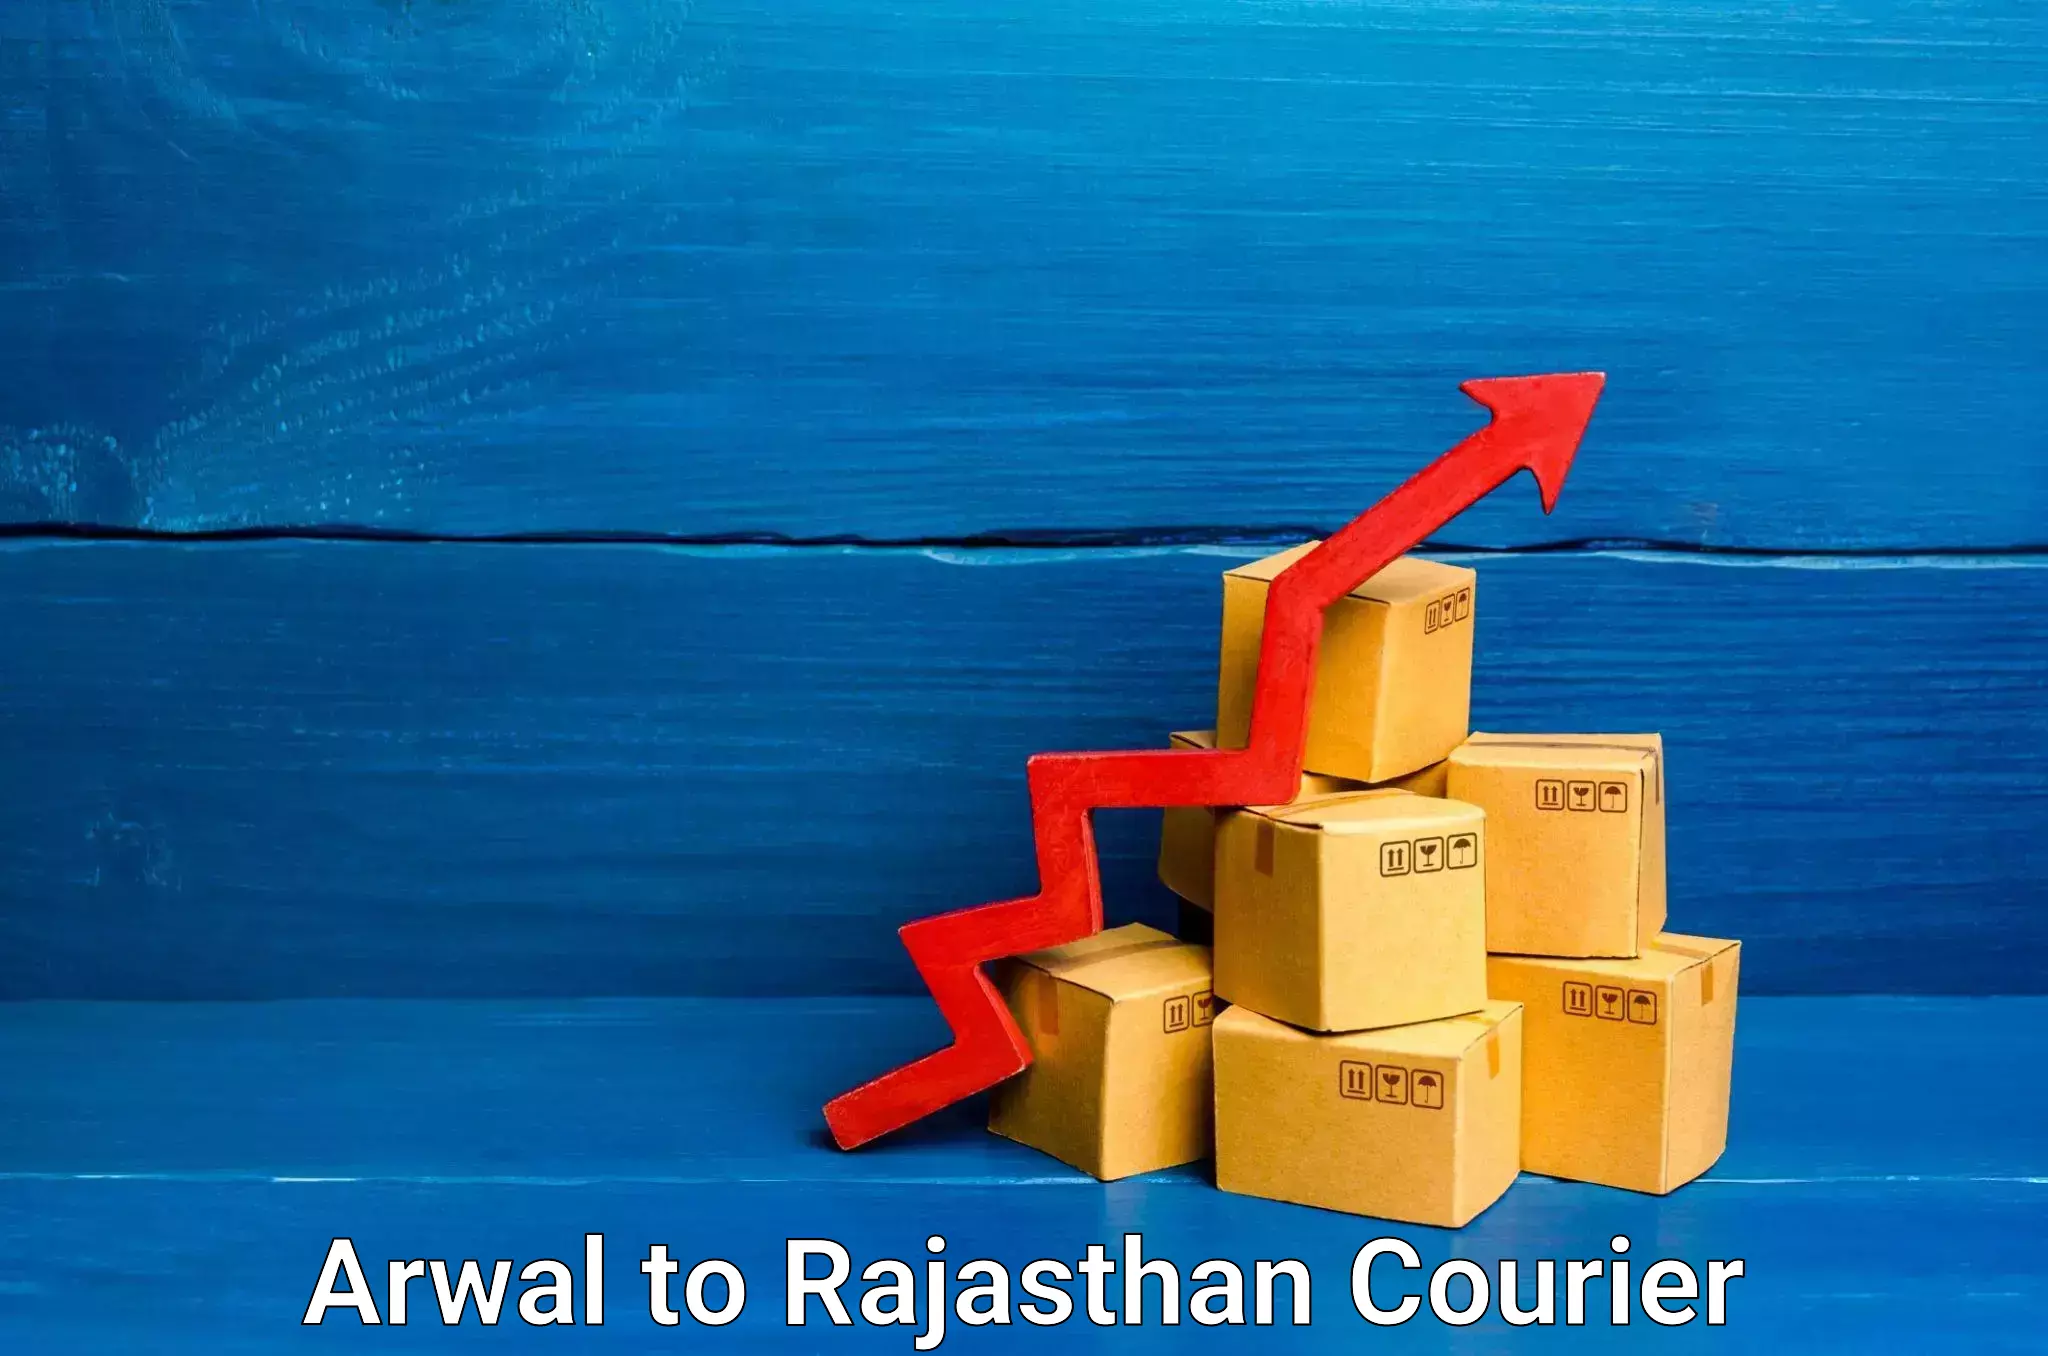 Furniture relocation experts Arwal to Rajasthan